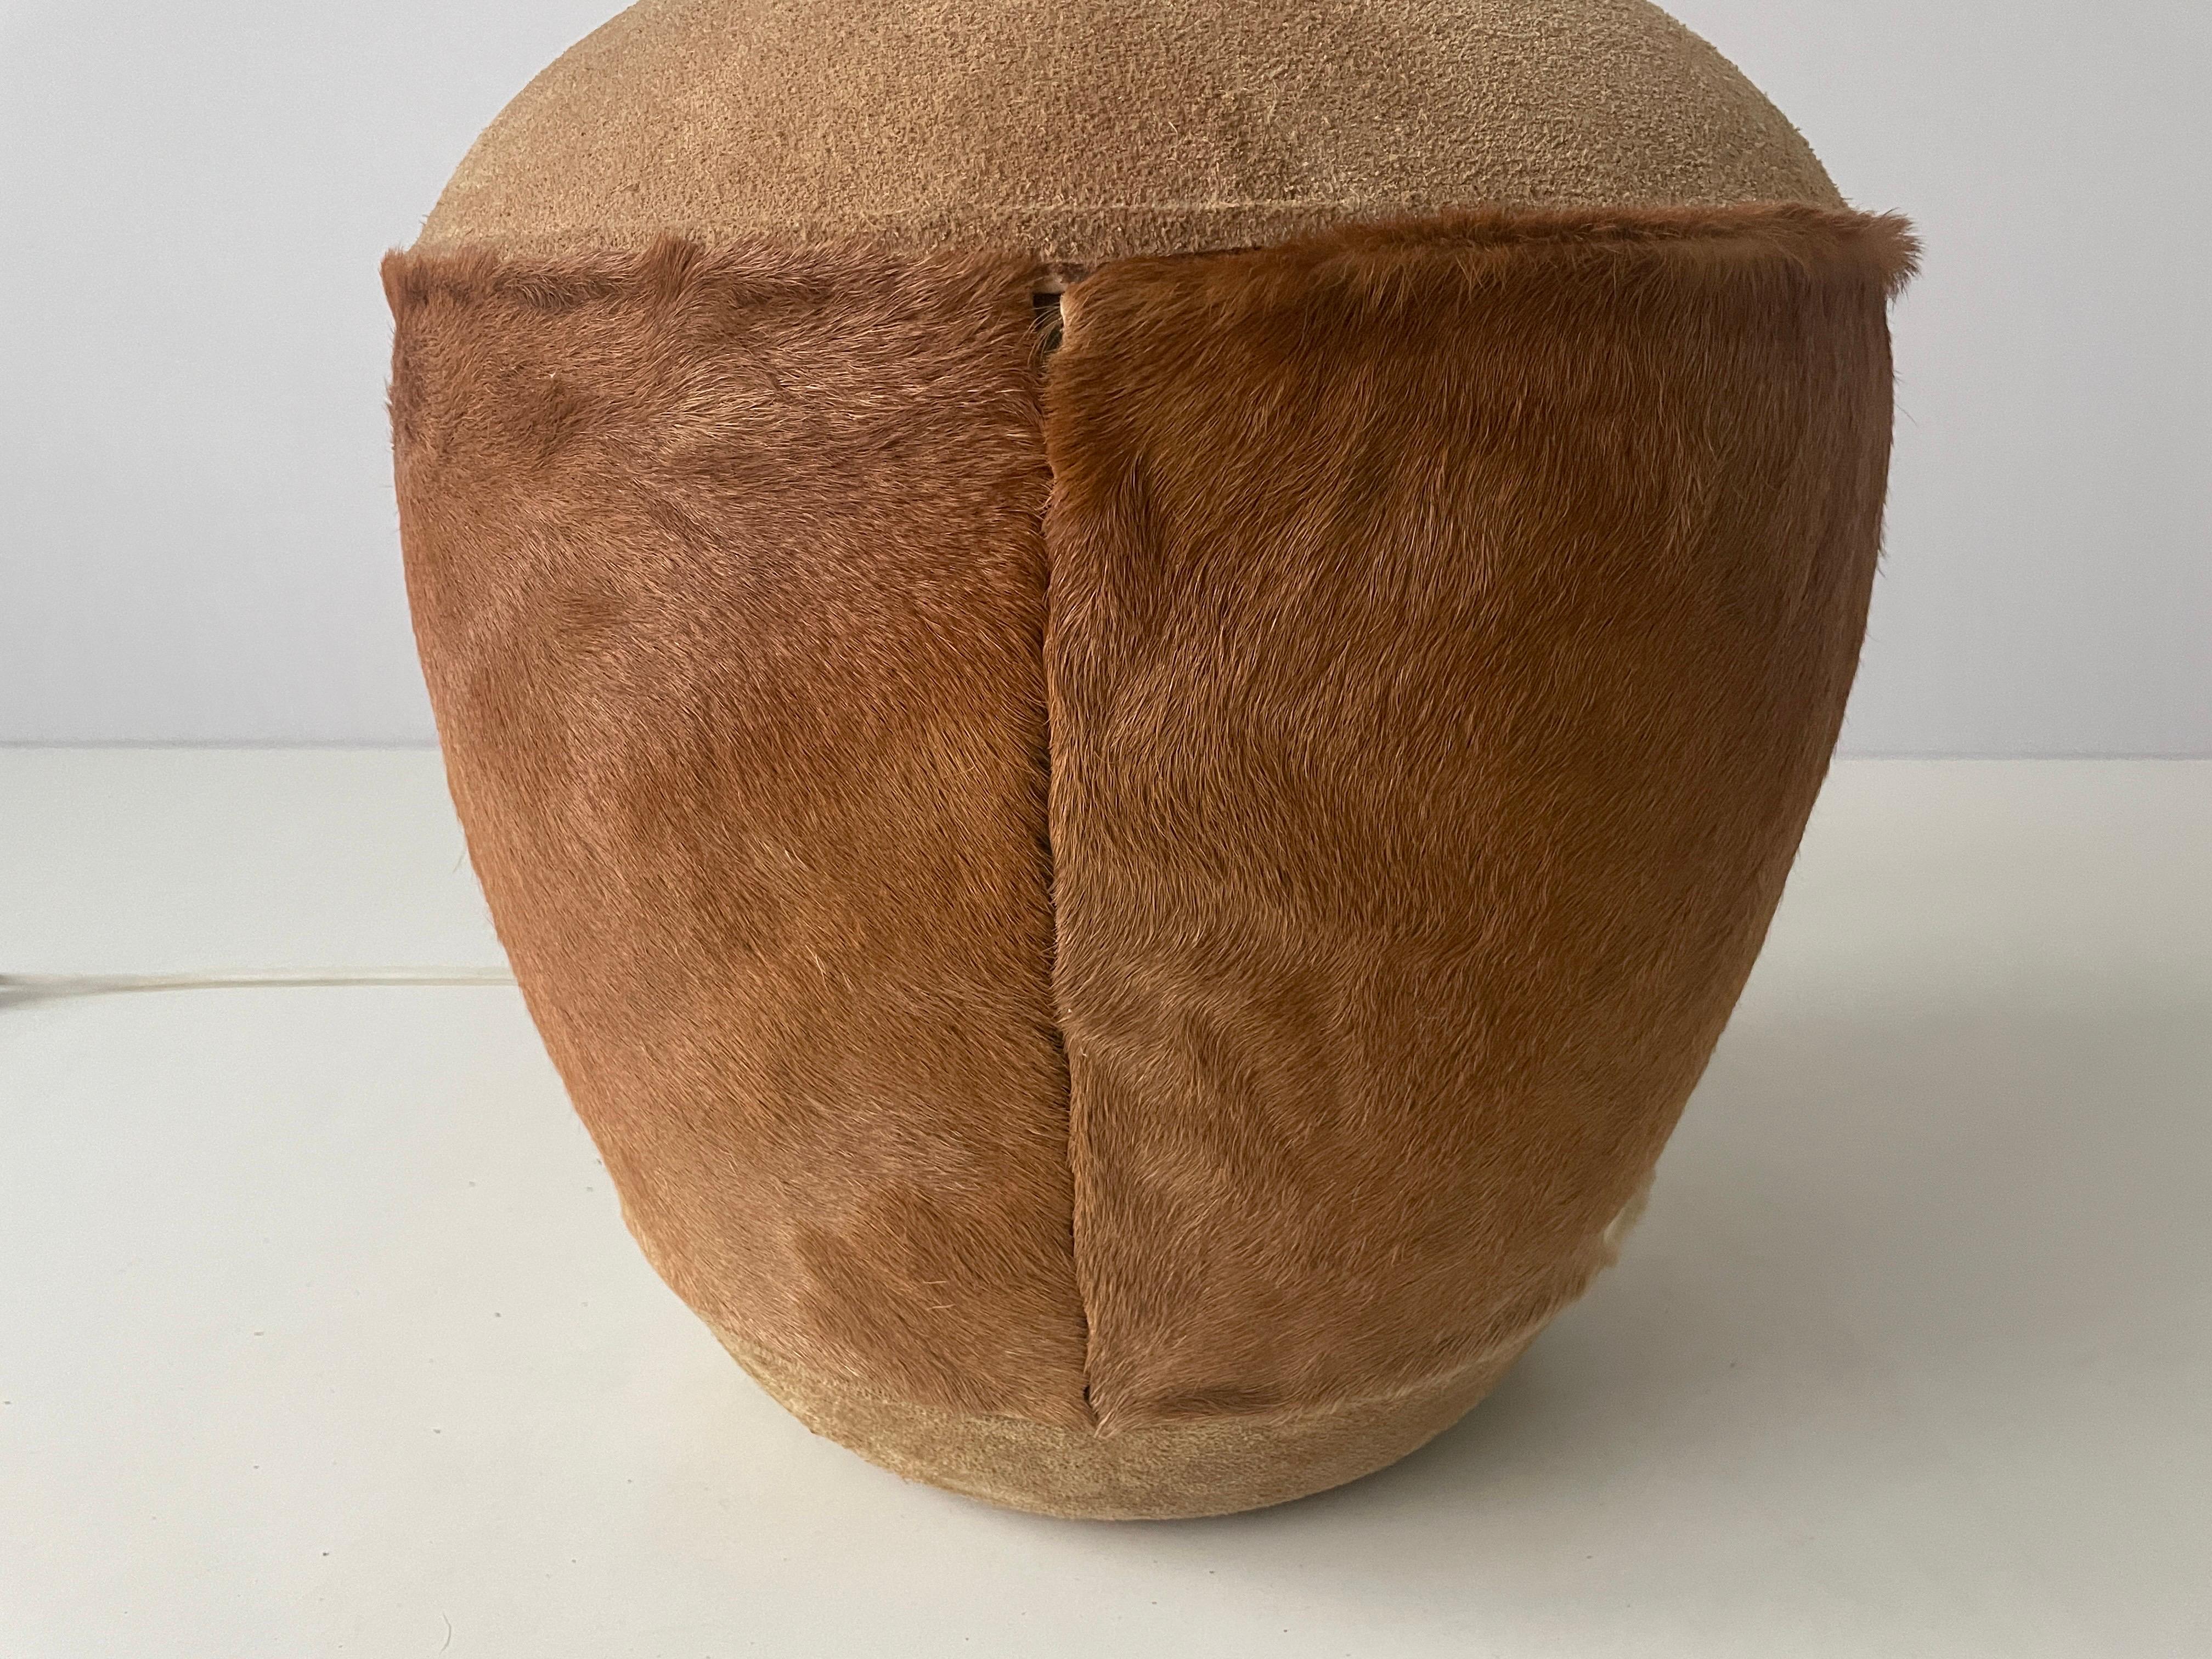 Tan Suede Leather and Glass Shade Floor or Table Lamp, 1960s, Denmark In Good Condition For Sale In Hagenbach, DE